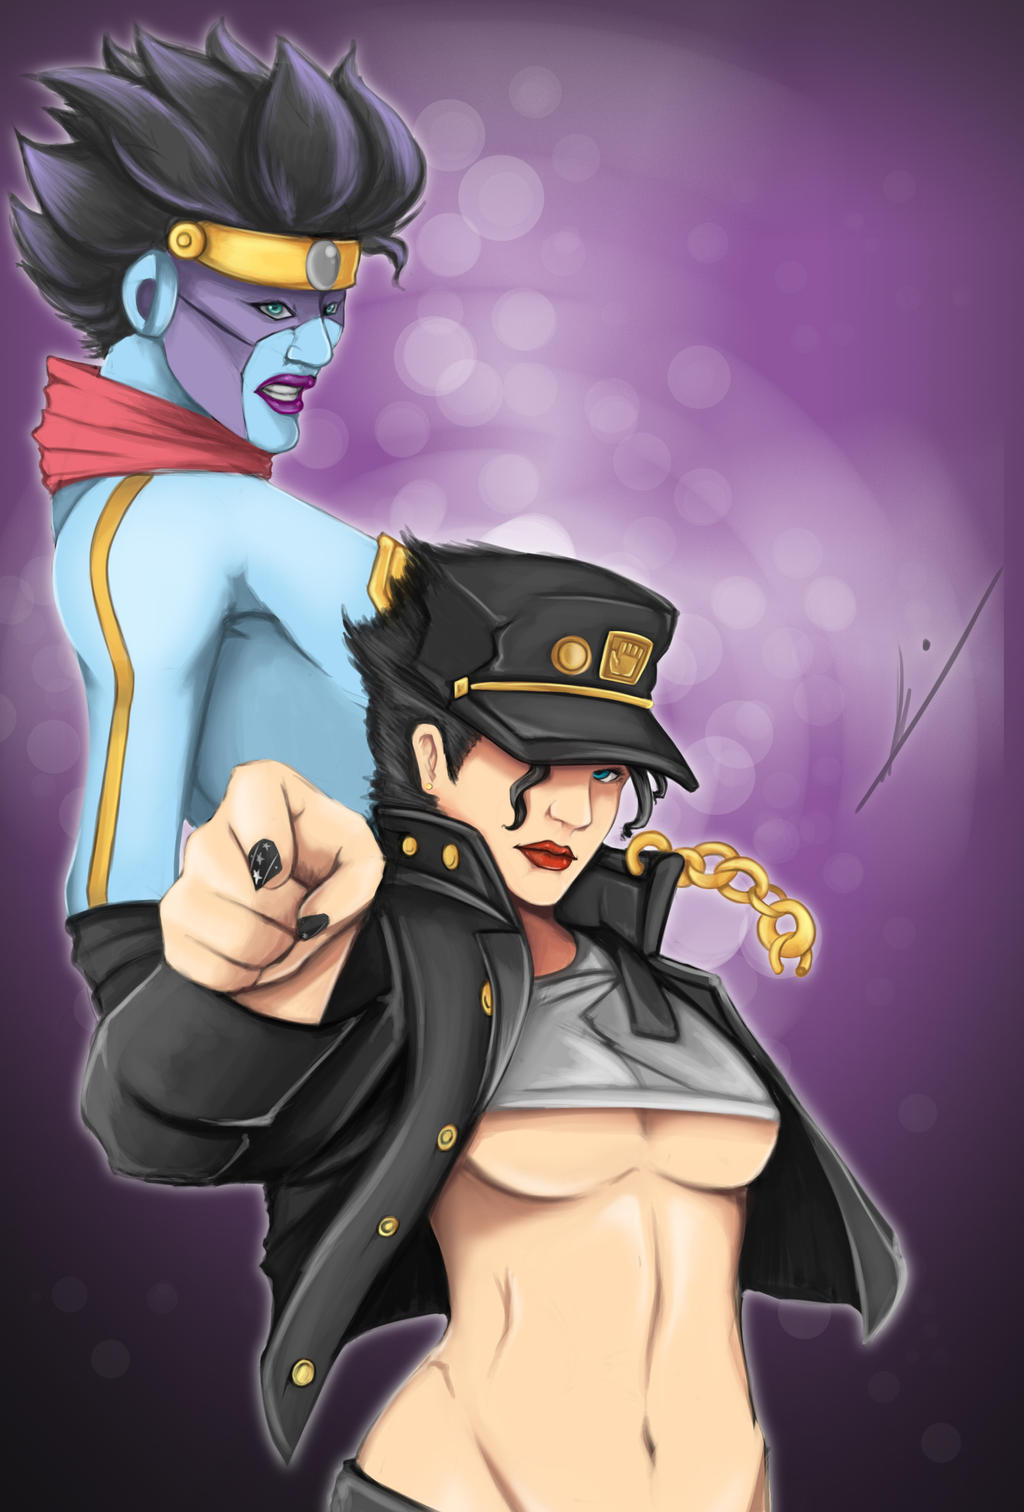 ⭐️Star platinum will ORA you⭐️ After drawing Fem Jotaro people asked for Star  Platinum! So I finally got around to doing a design for them…